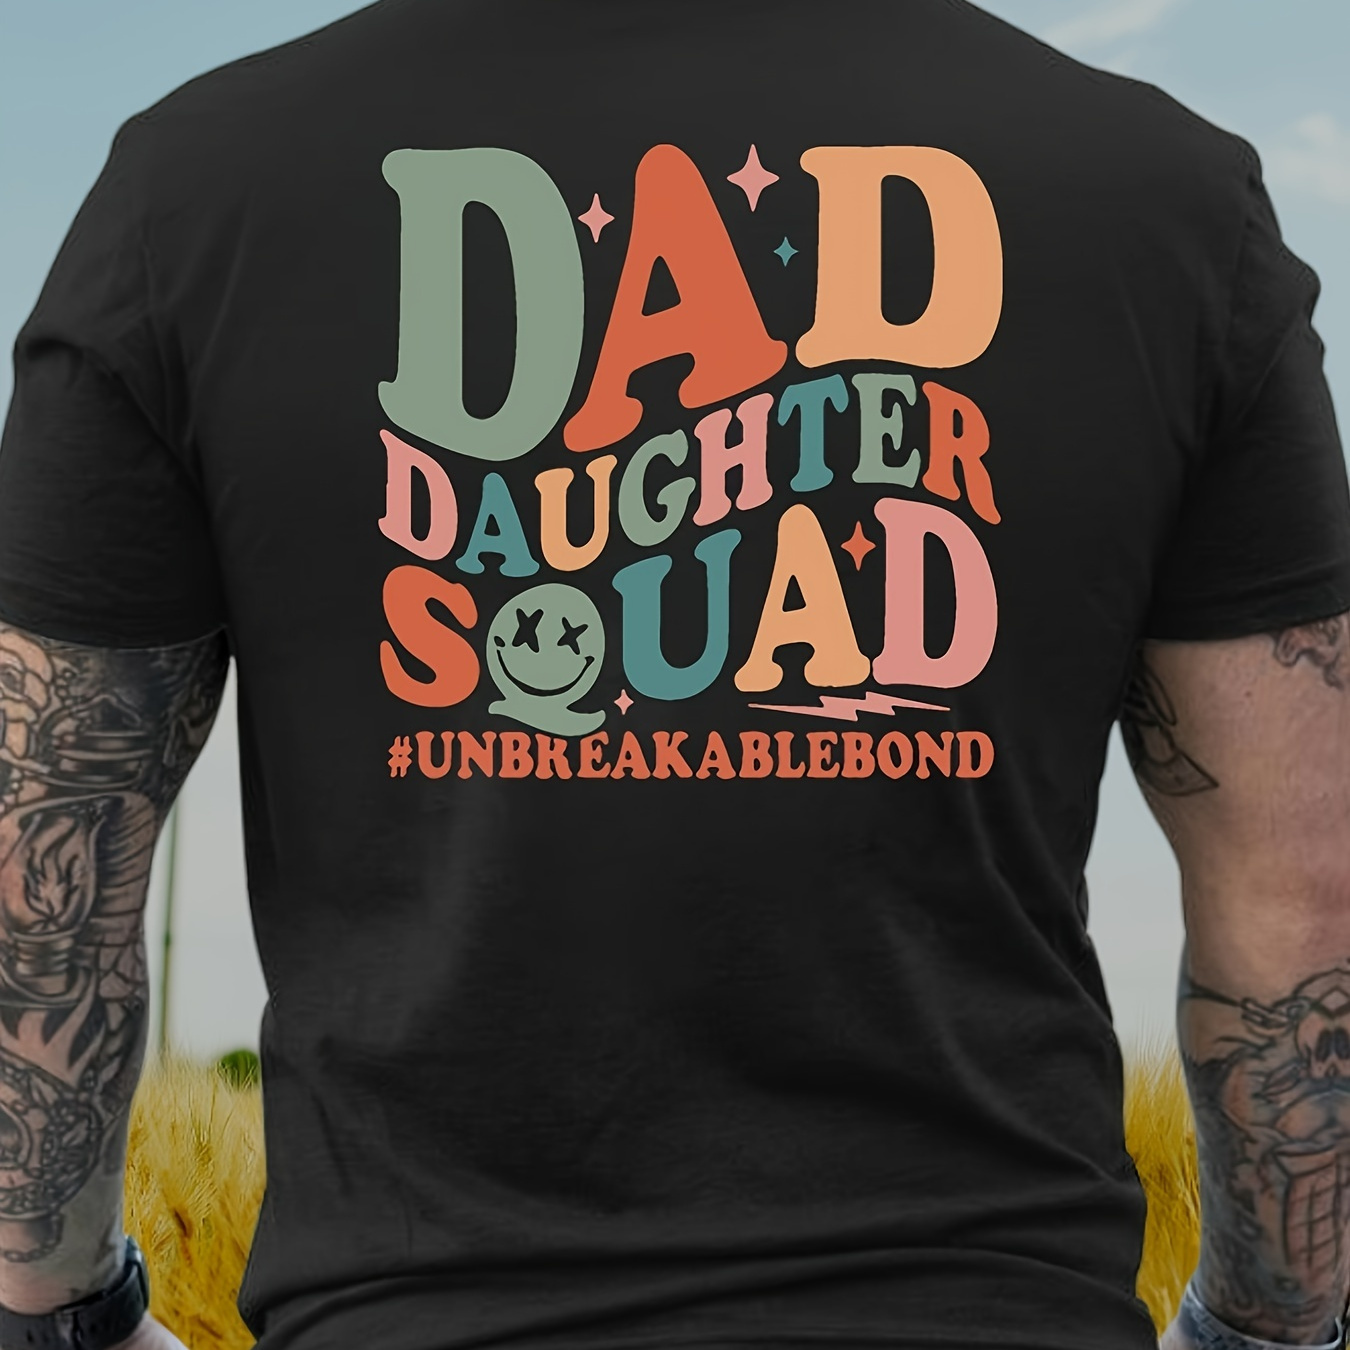 

Dad Daughter Squad Unbreakablebond Printed Men's Heavy 220g Cotton Round Neck Short Sleeve T-shirt, Casual T-shirt, Fashion Comfortable Breathable Light Summer Top